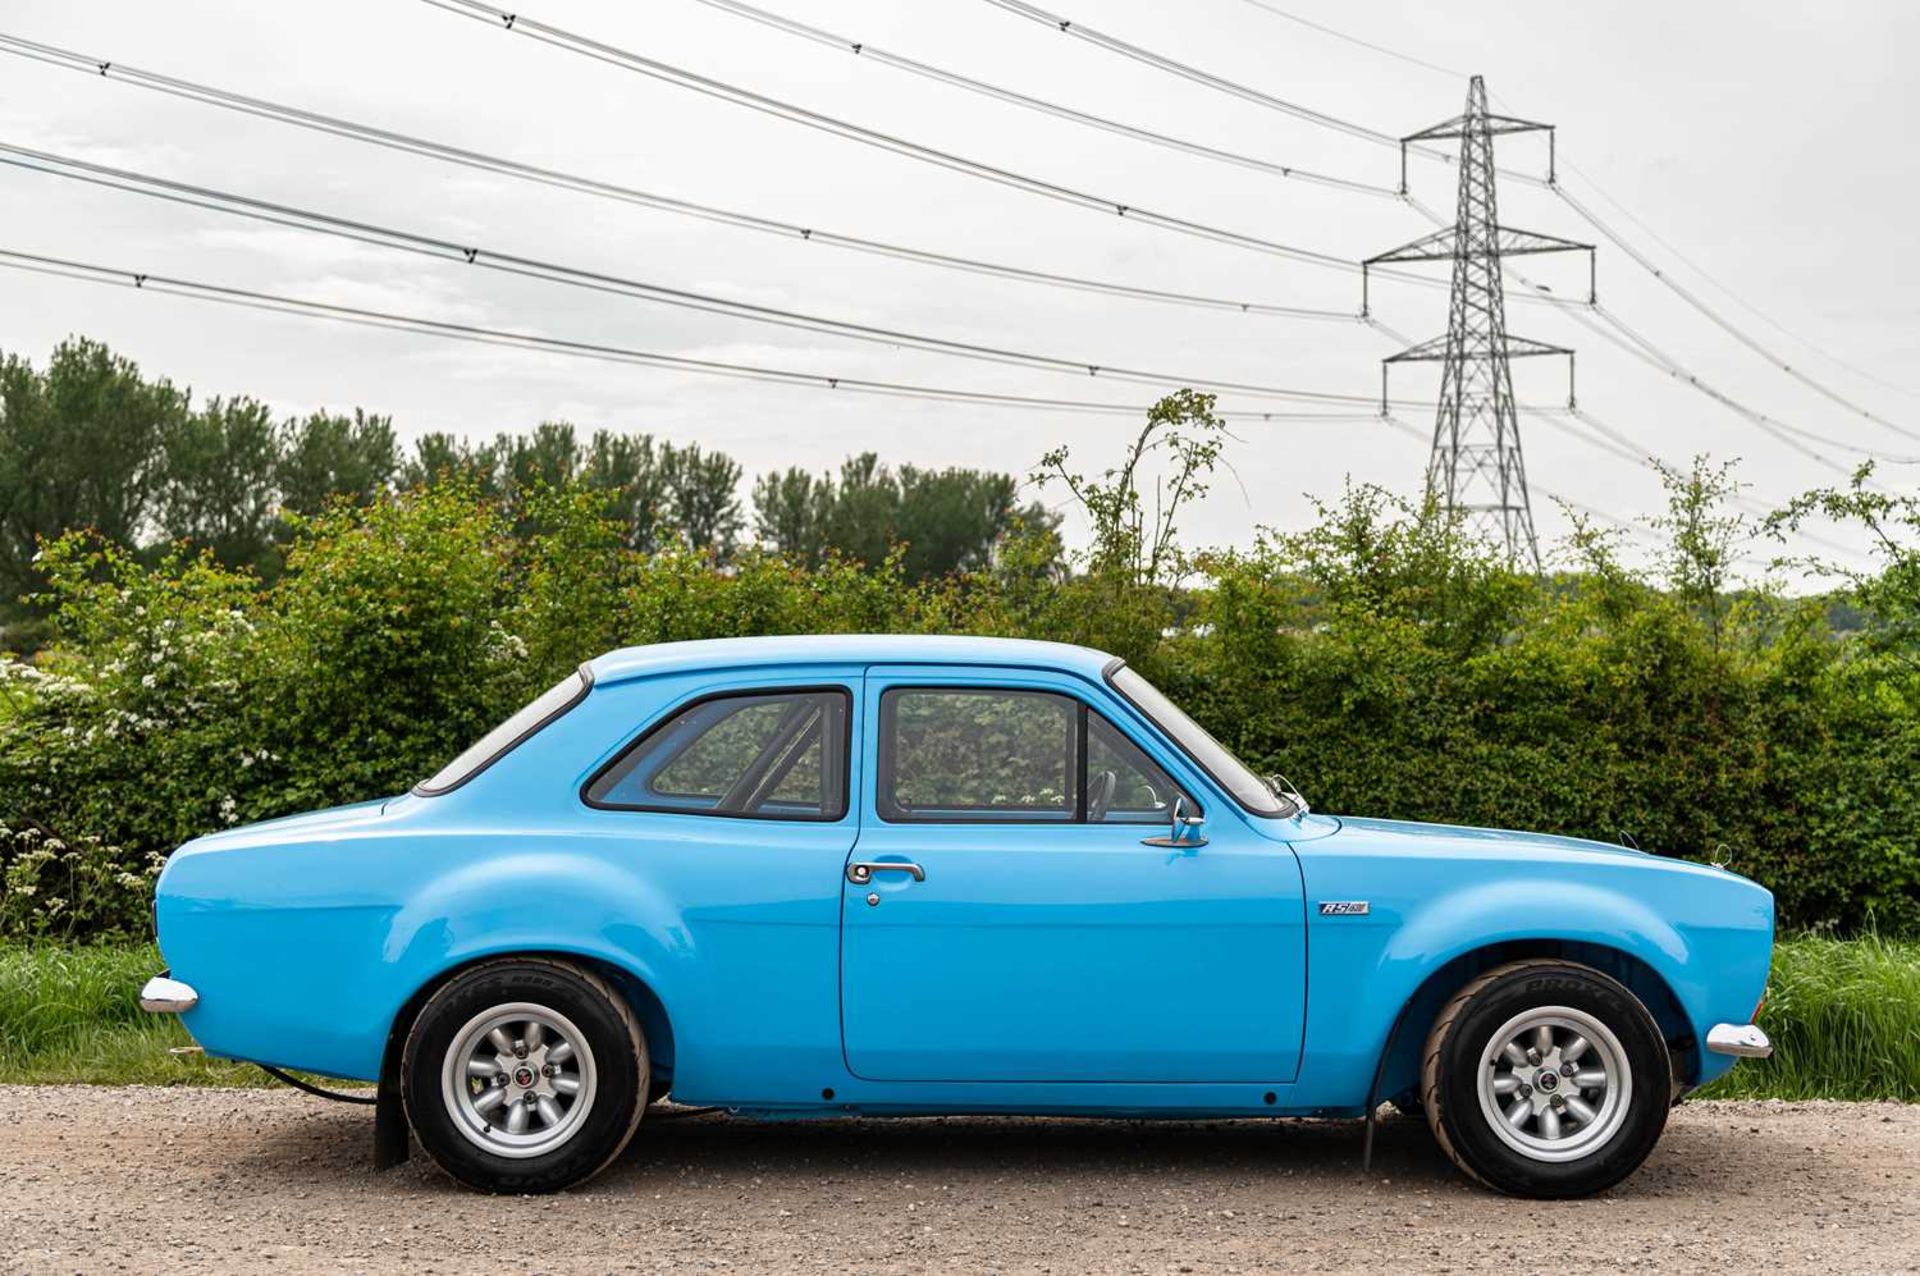 1973 Ford Escort RS1600 The ultimate no-expense-spared build to historic GP4 rally specification, fi - Image 68 of 84